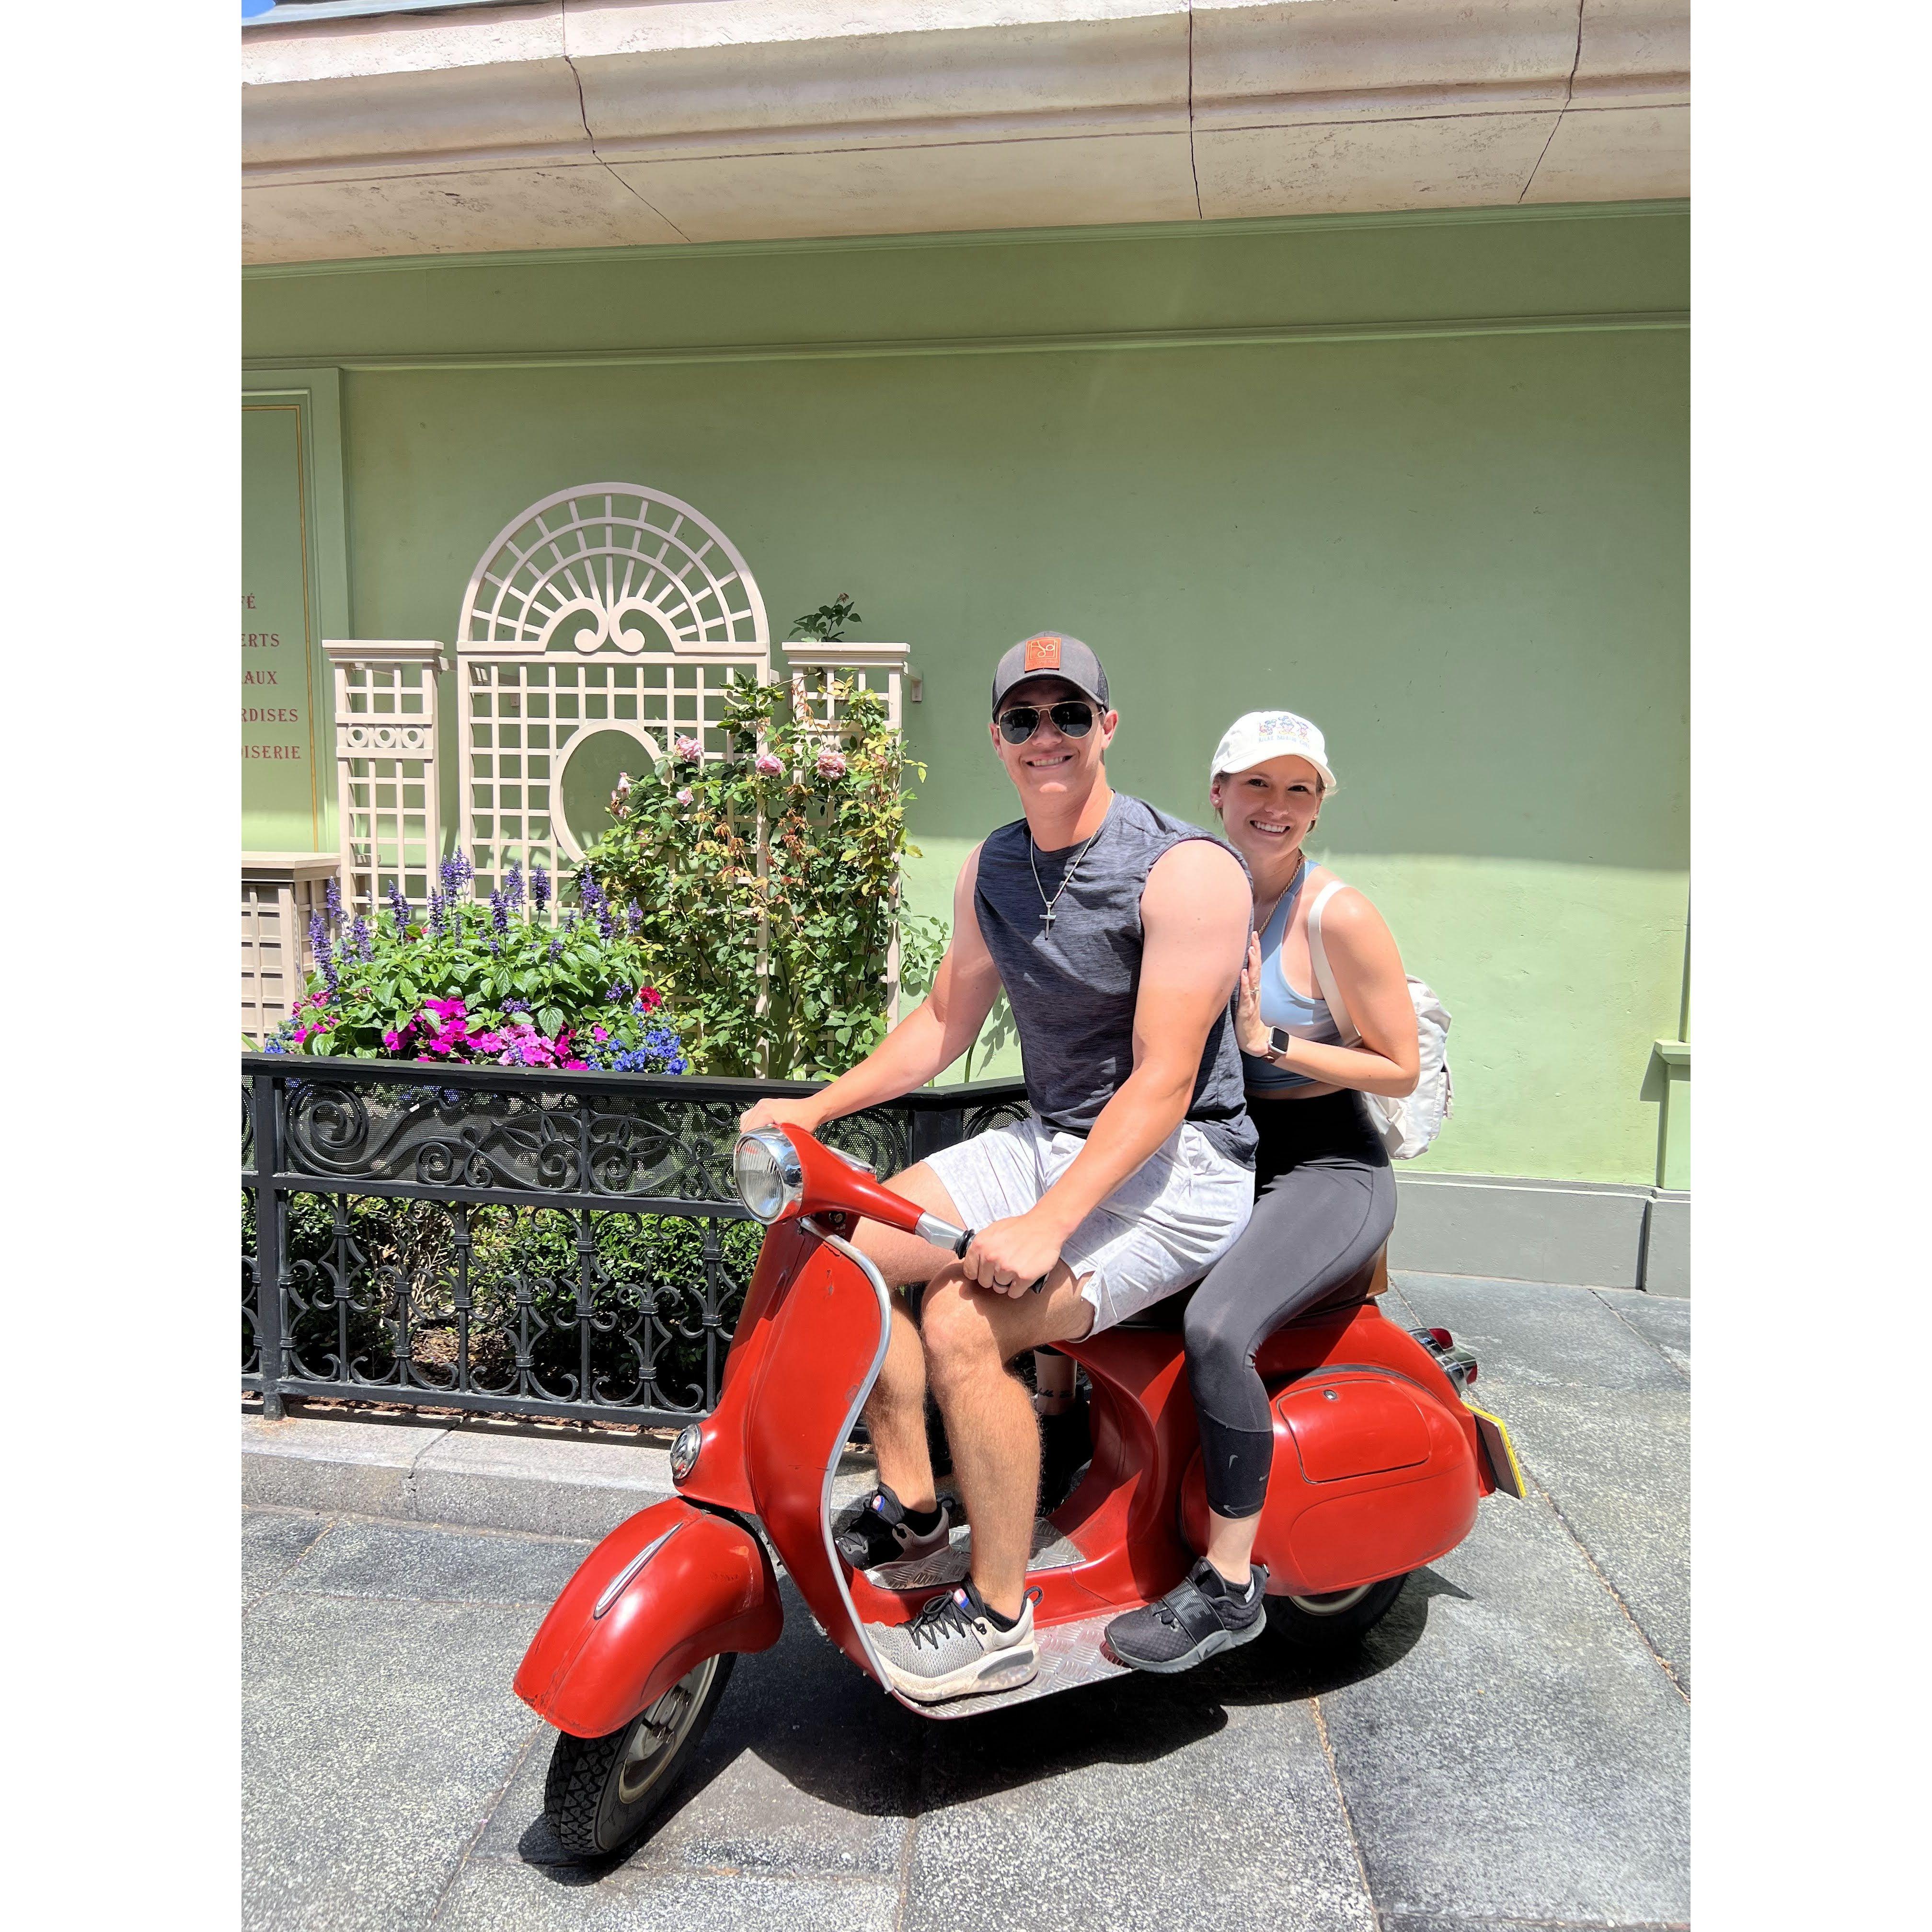 Pretending we're riding our Vespa around Epcot- our first theme park togehter